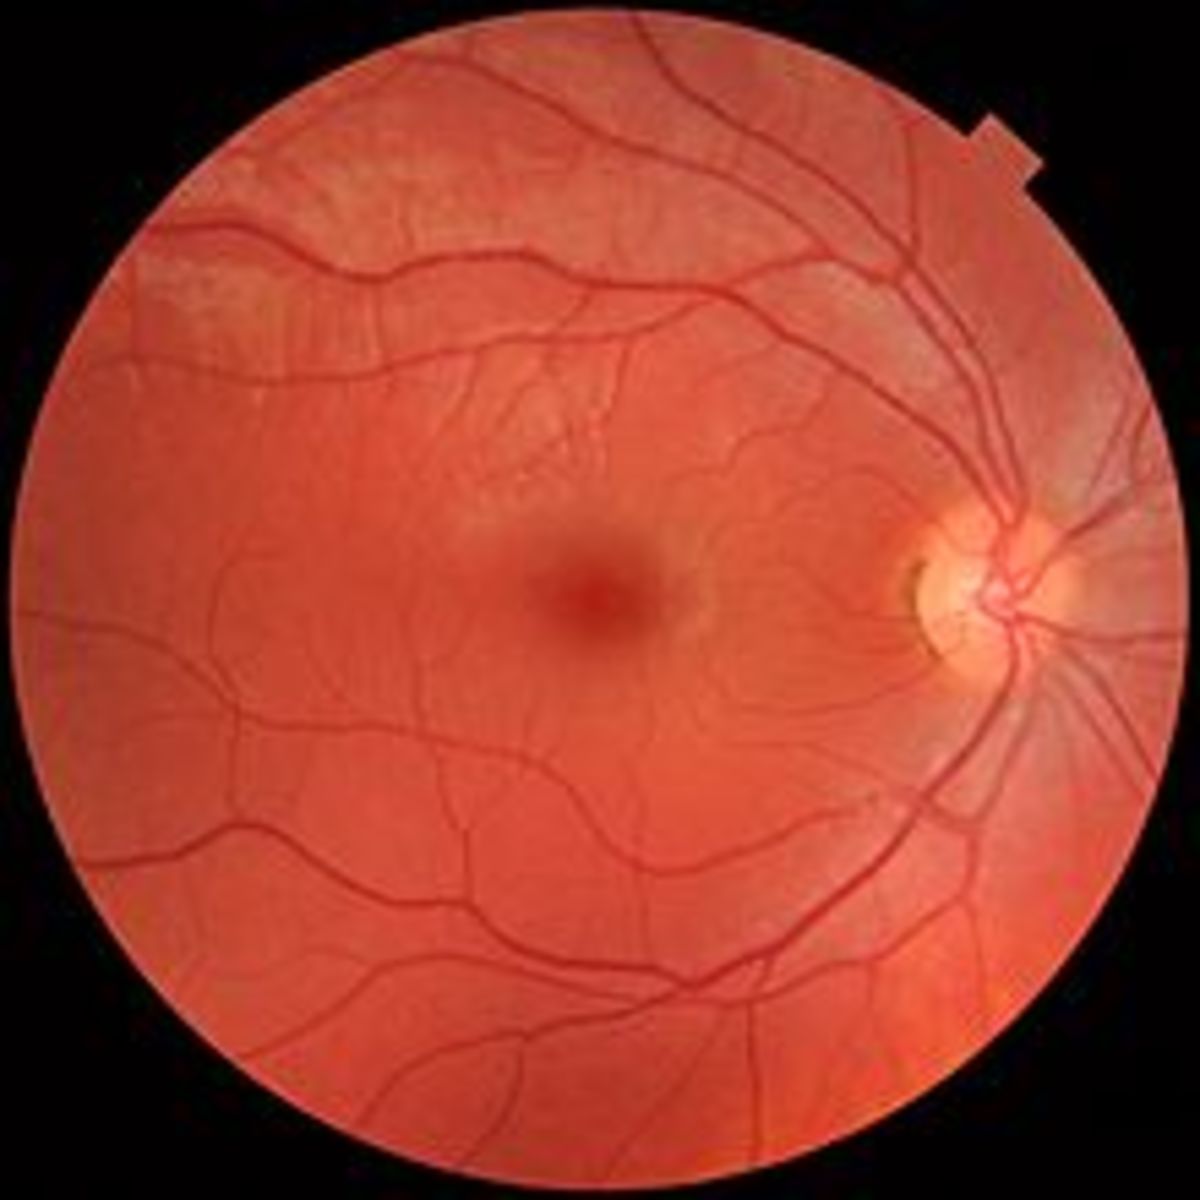 This image shows what an ophthalmologist sees upon examination of the fundus.